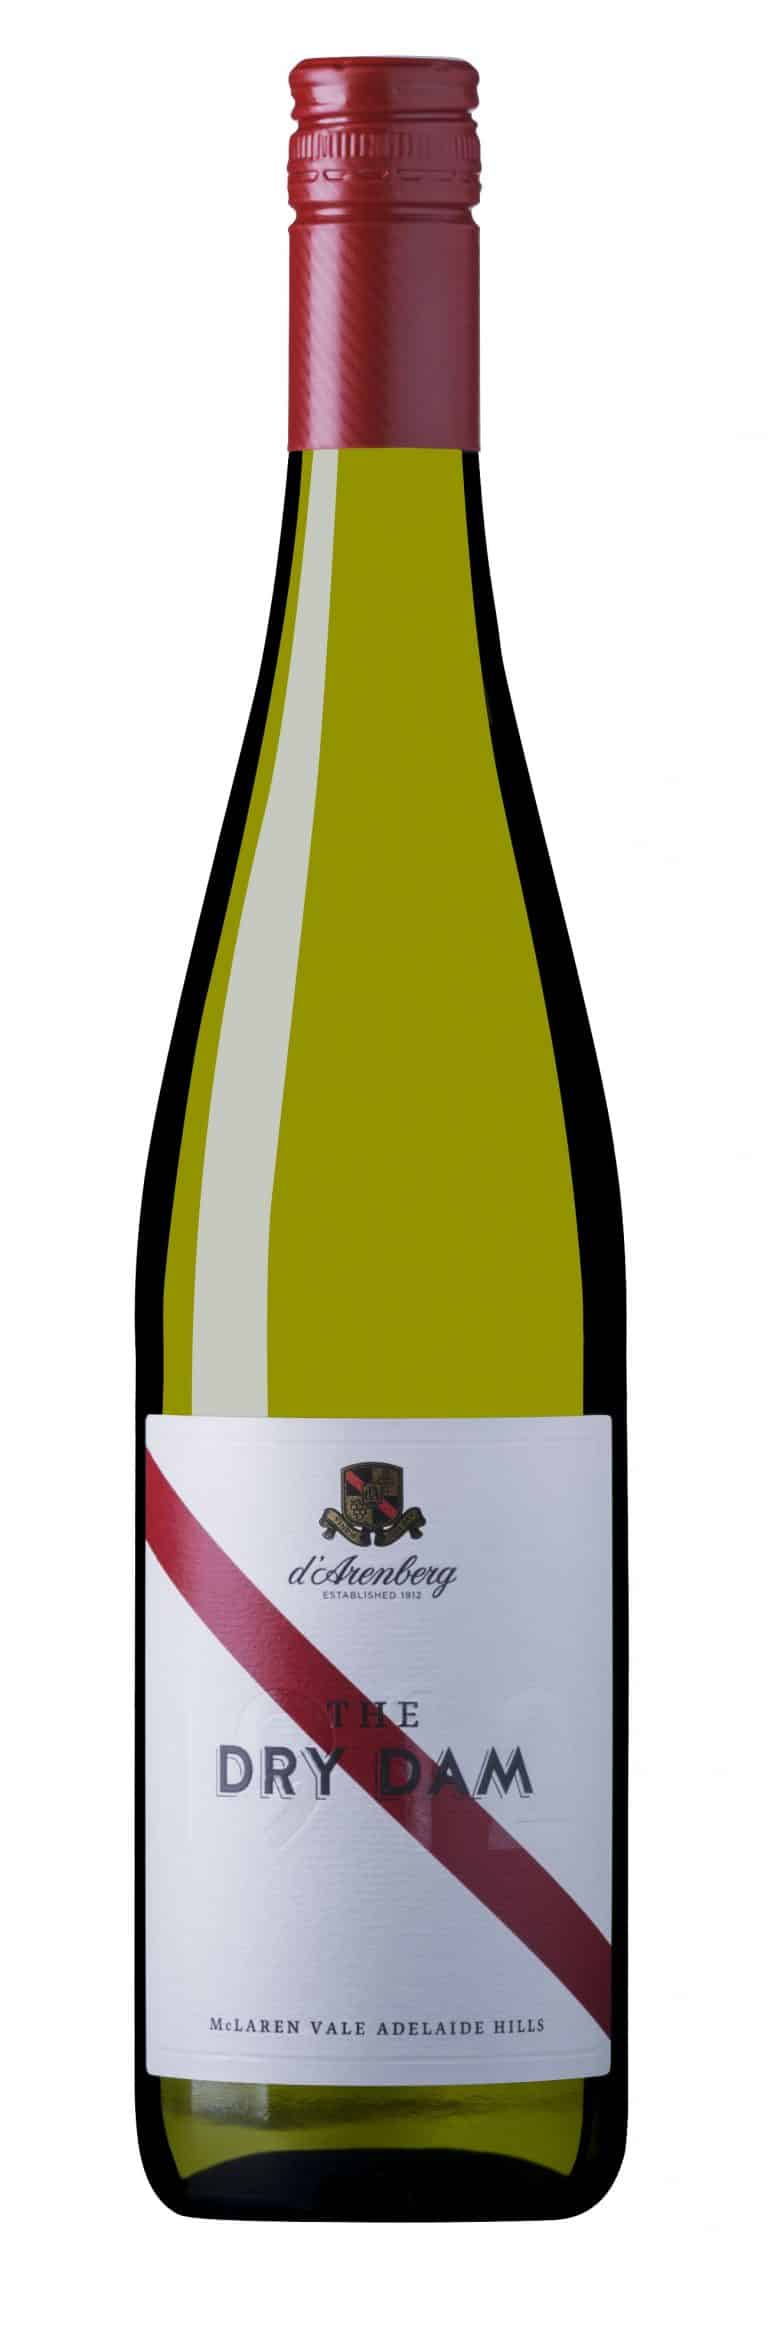 The Dry Dam Riesling new PNG